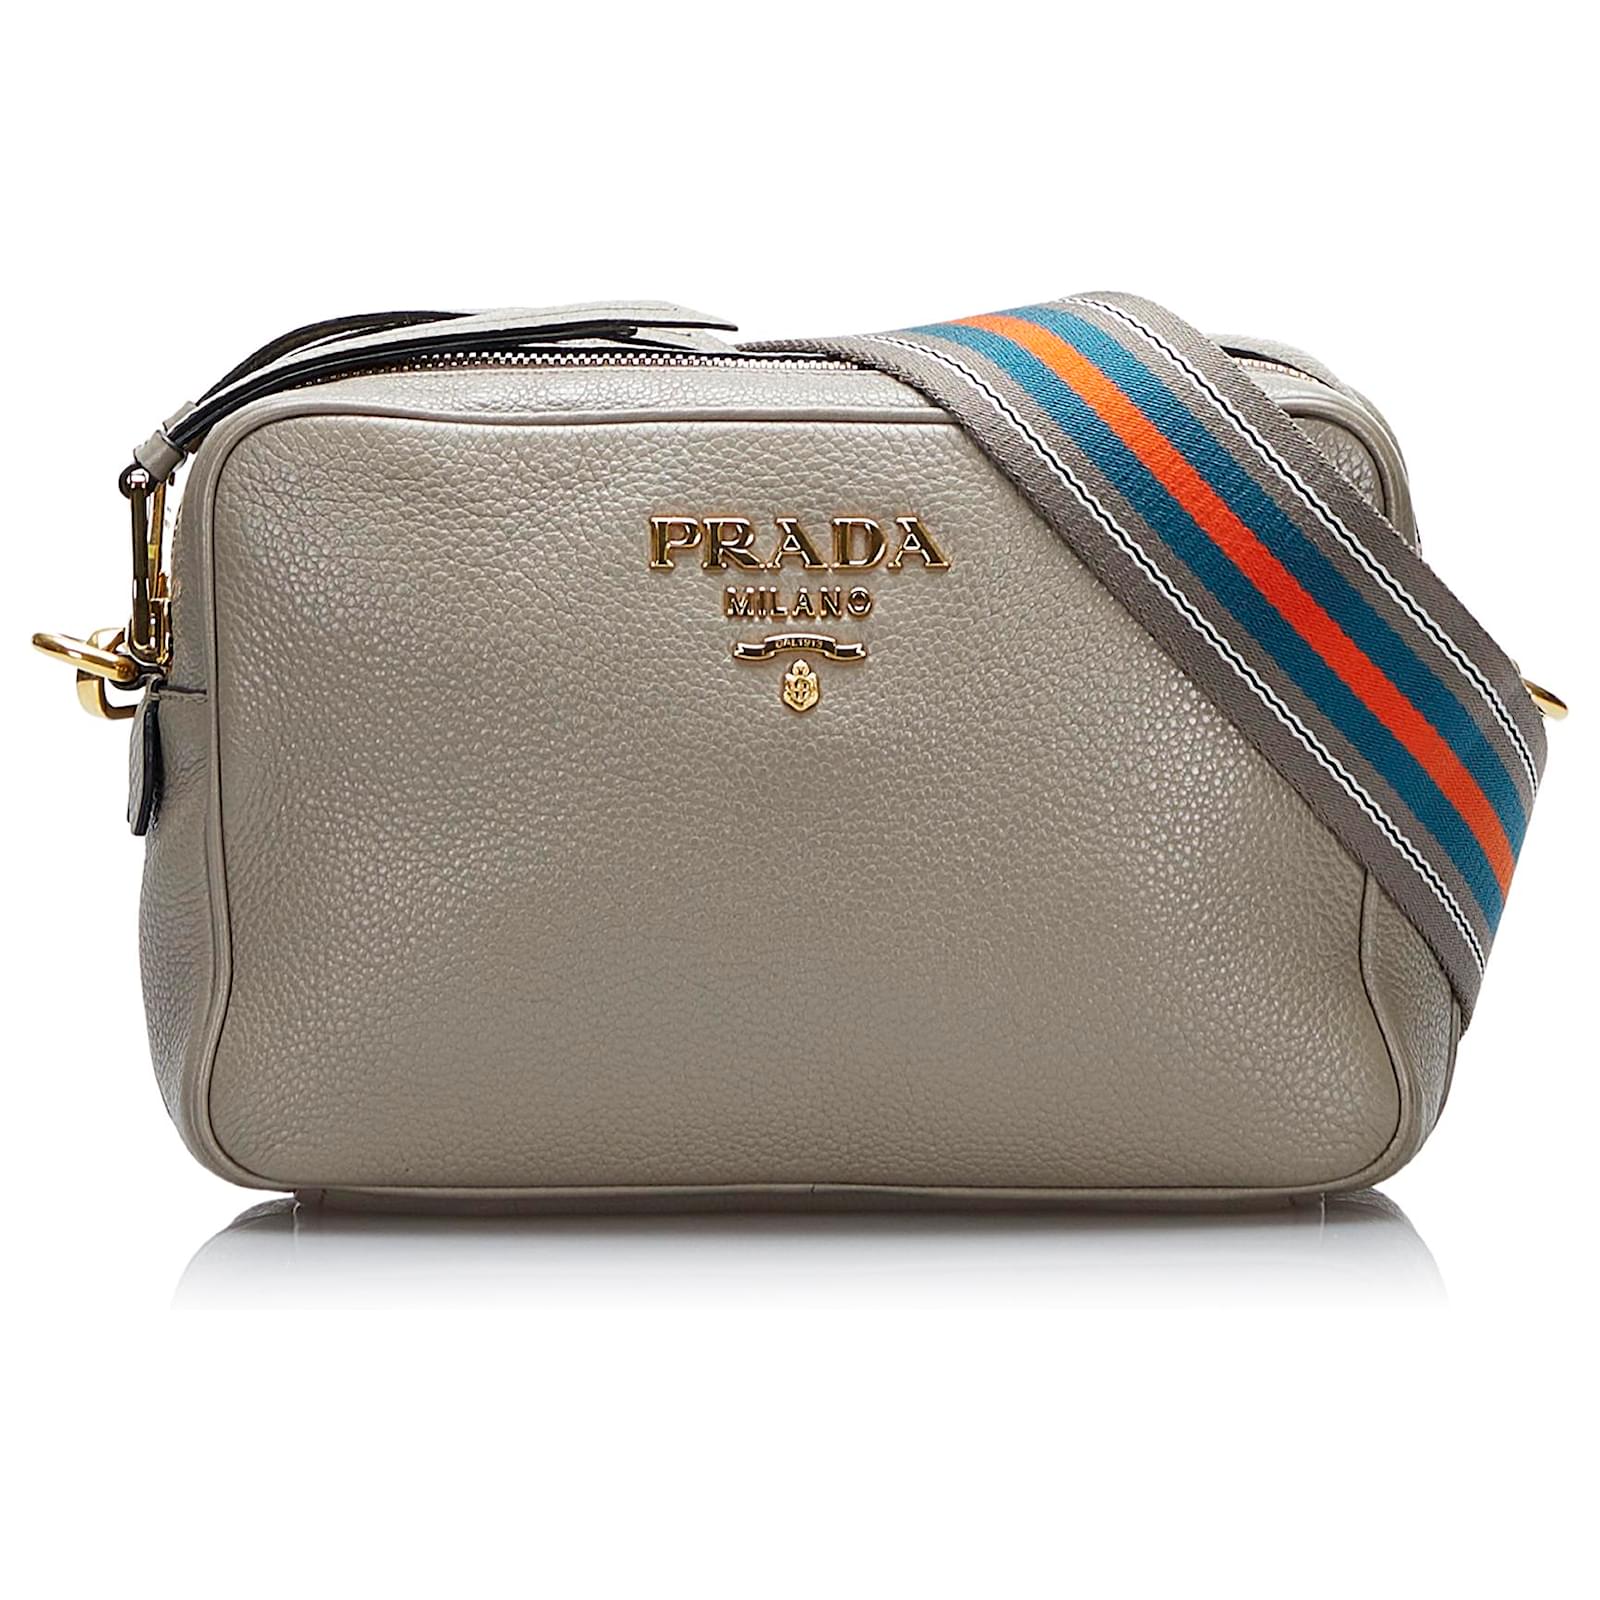 BaggagePH - Prada Double Zip Camera Bag (Soft Leather) ♥️MOTHER's DAY  SALE♥️ 50% DP 49880 +iSF/Tax Cutoff SALE April 30 ETA MAY 14 🌸